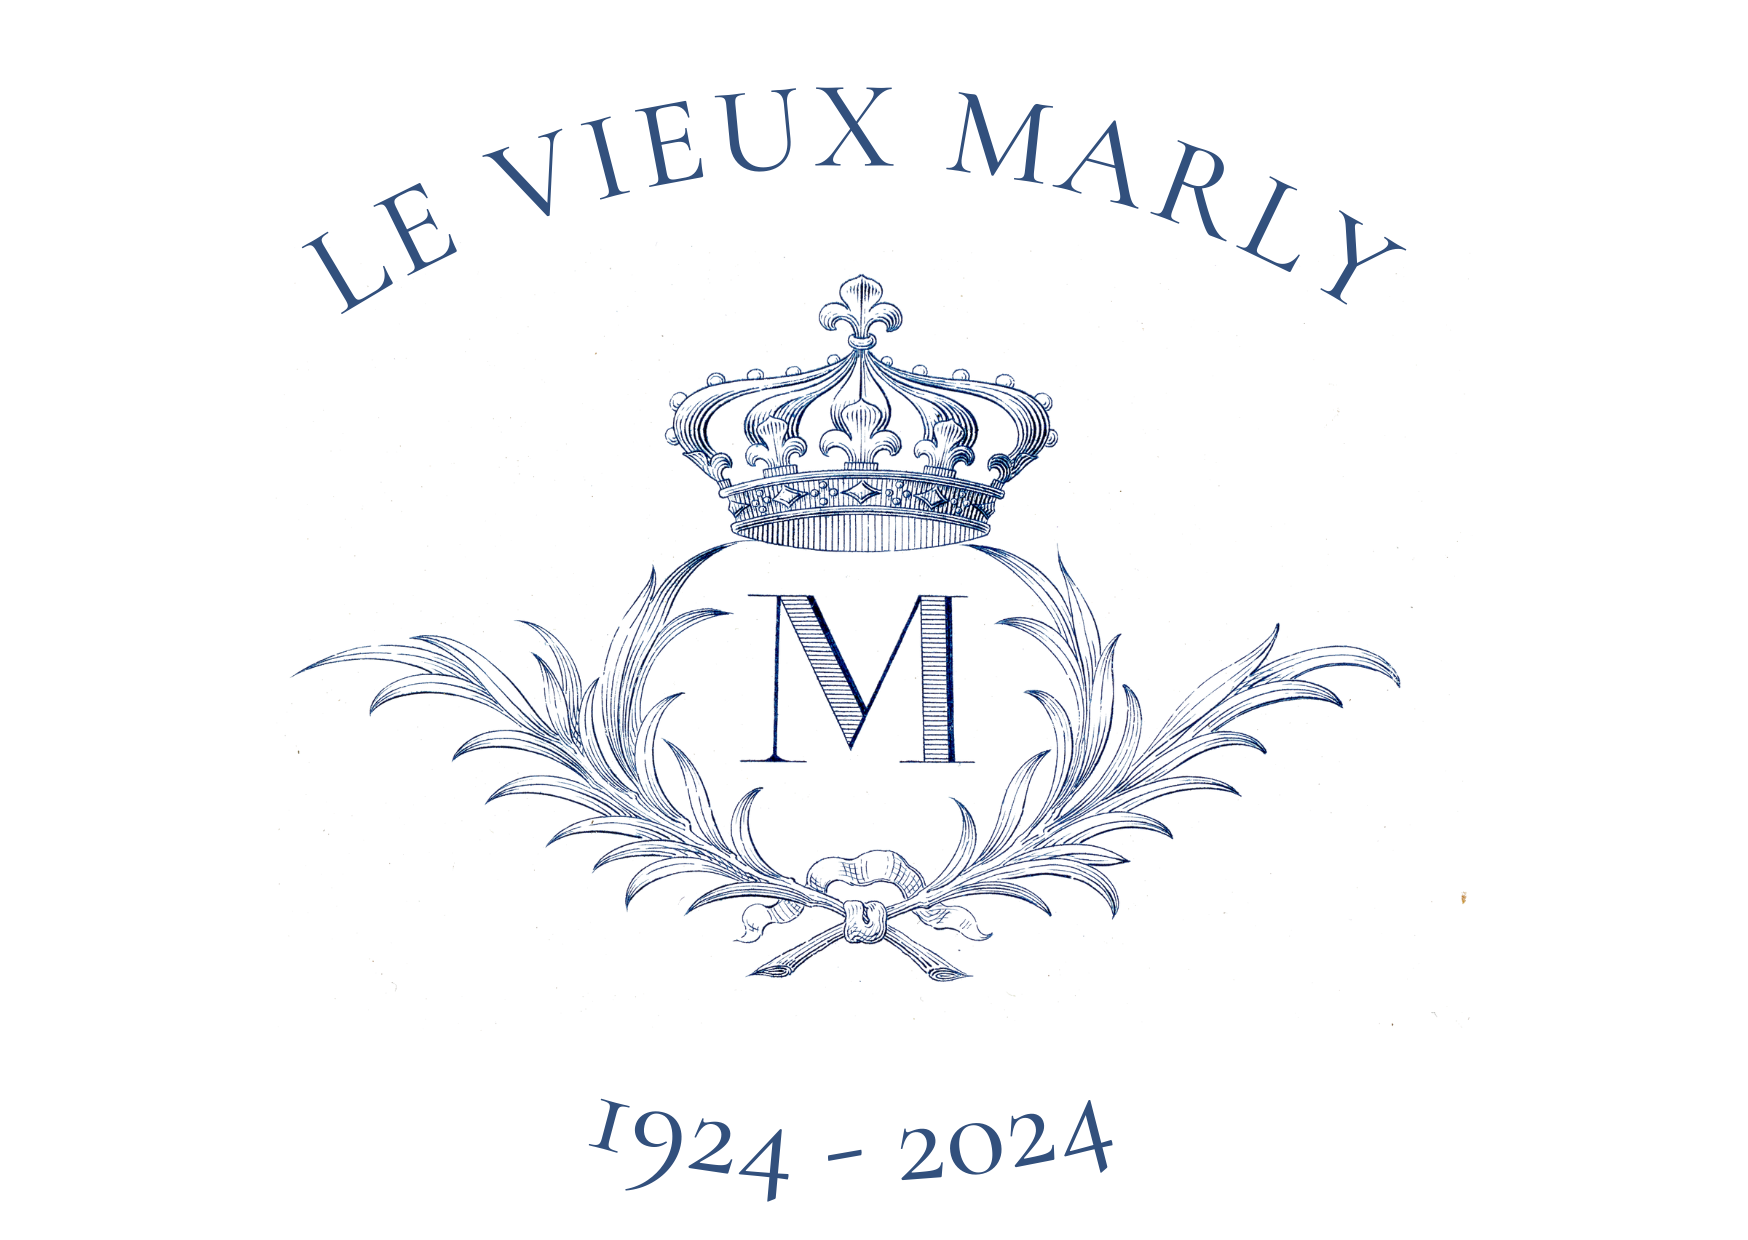 Le Vieux Marly